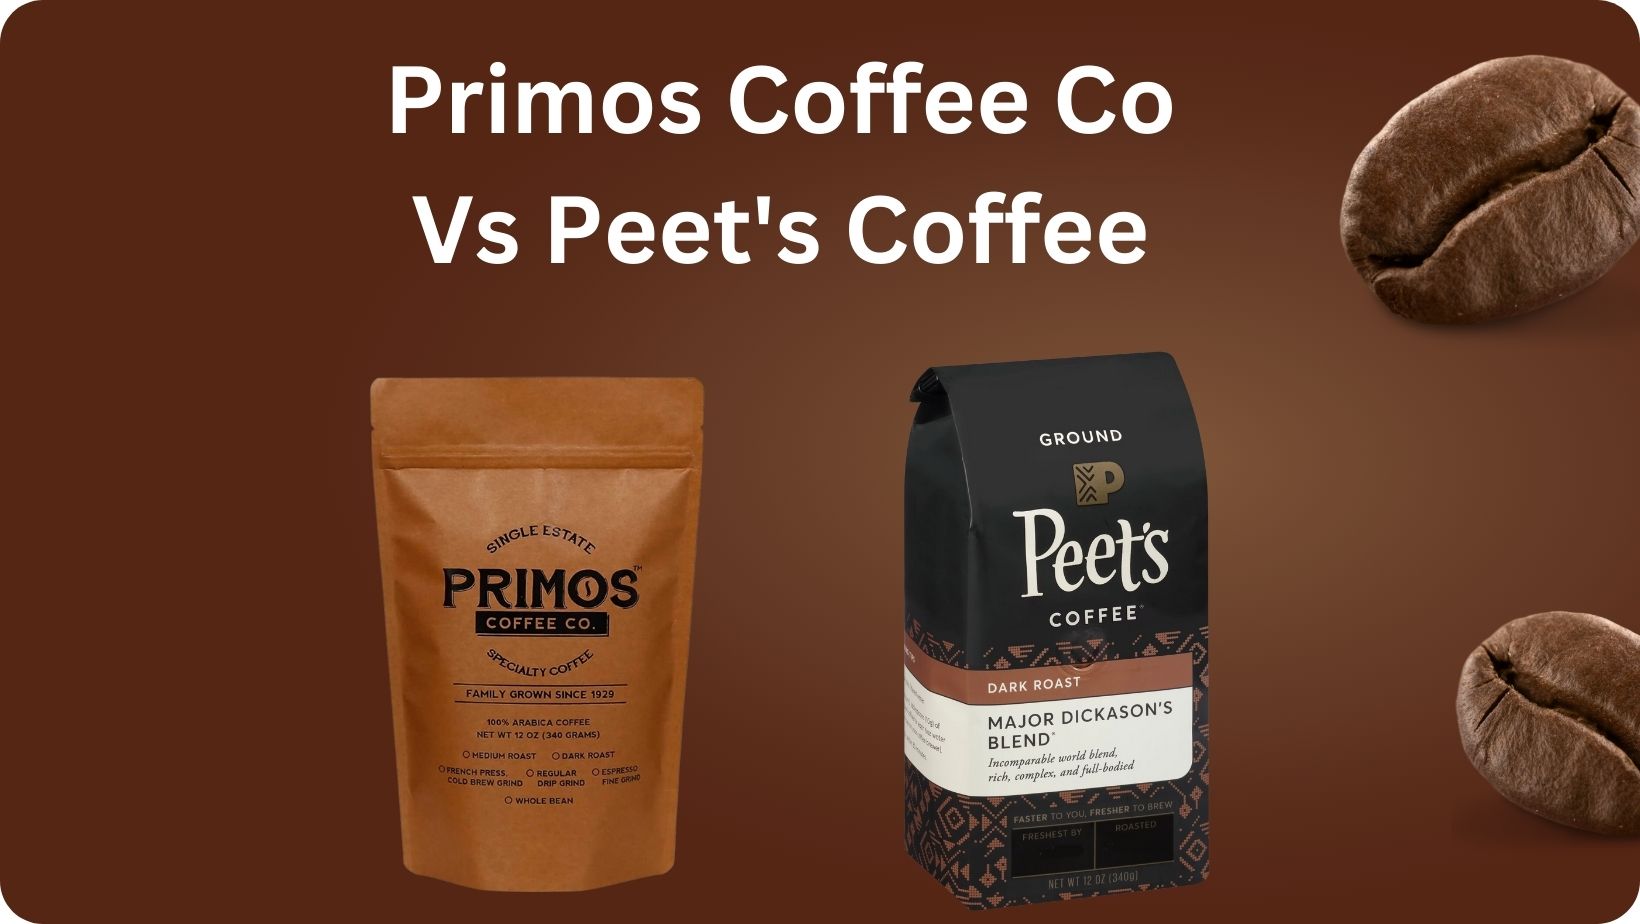 Primos Coffee Co Vs Peet's Coffee: Which One Is Best?